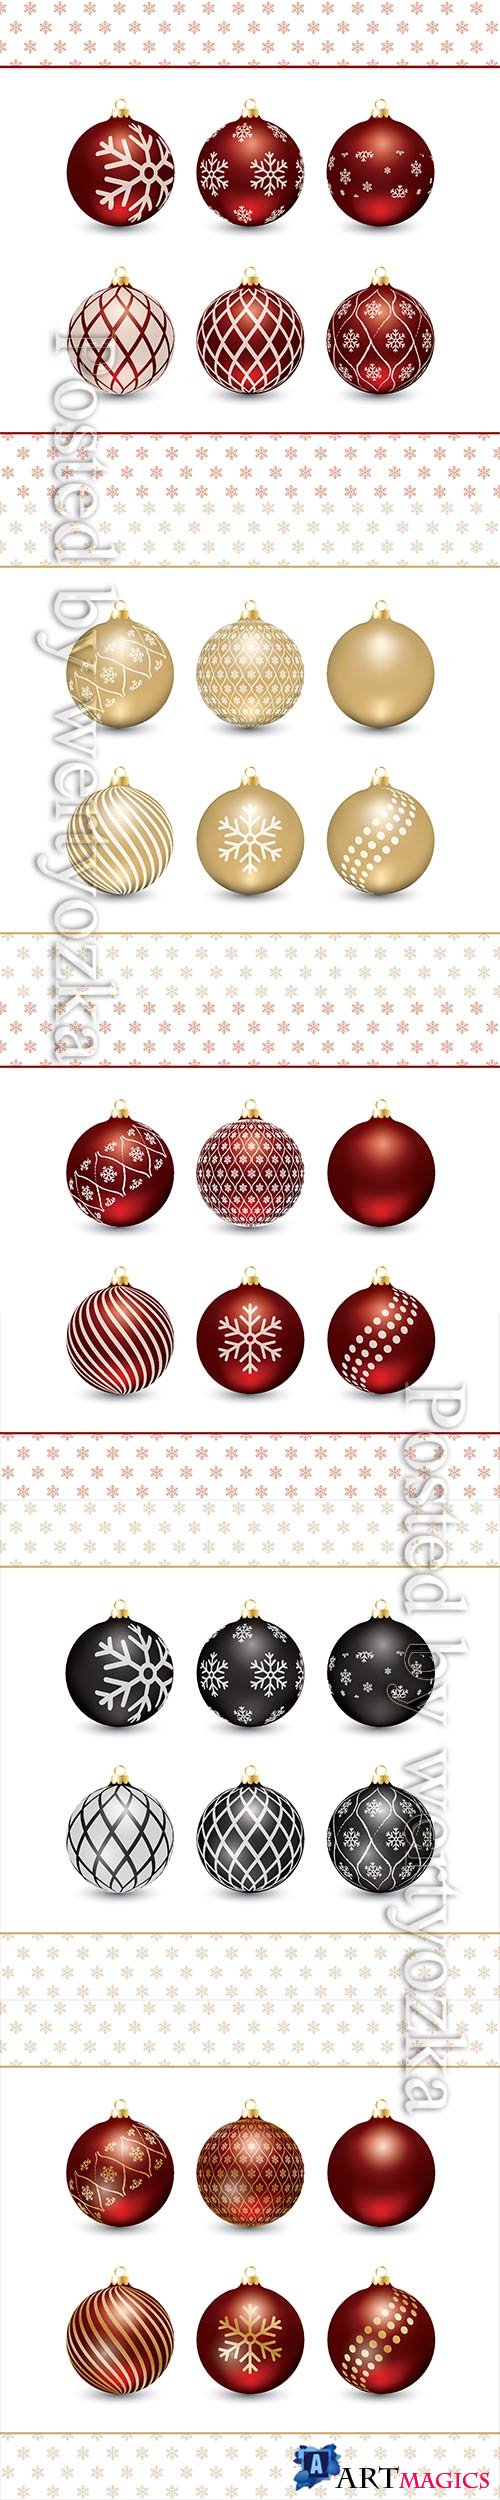 Christmas balls with ornaments decorations in gold